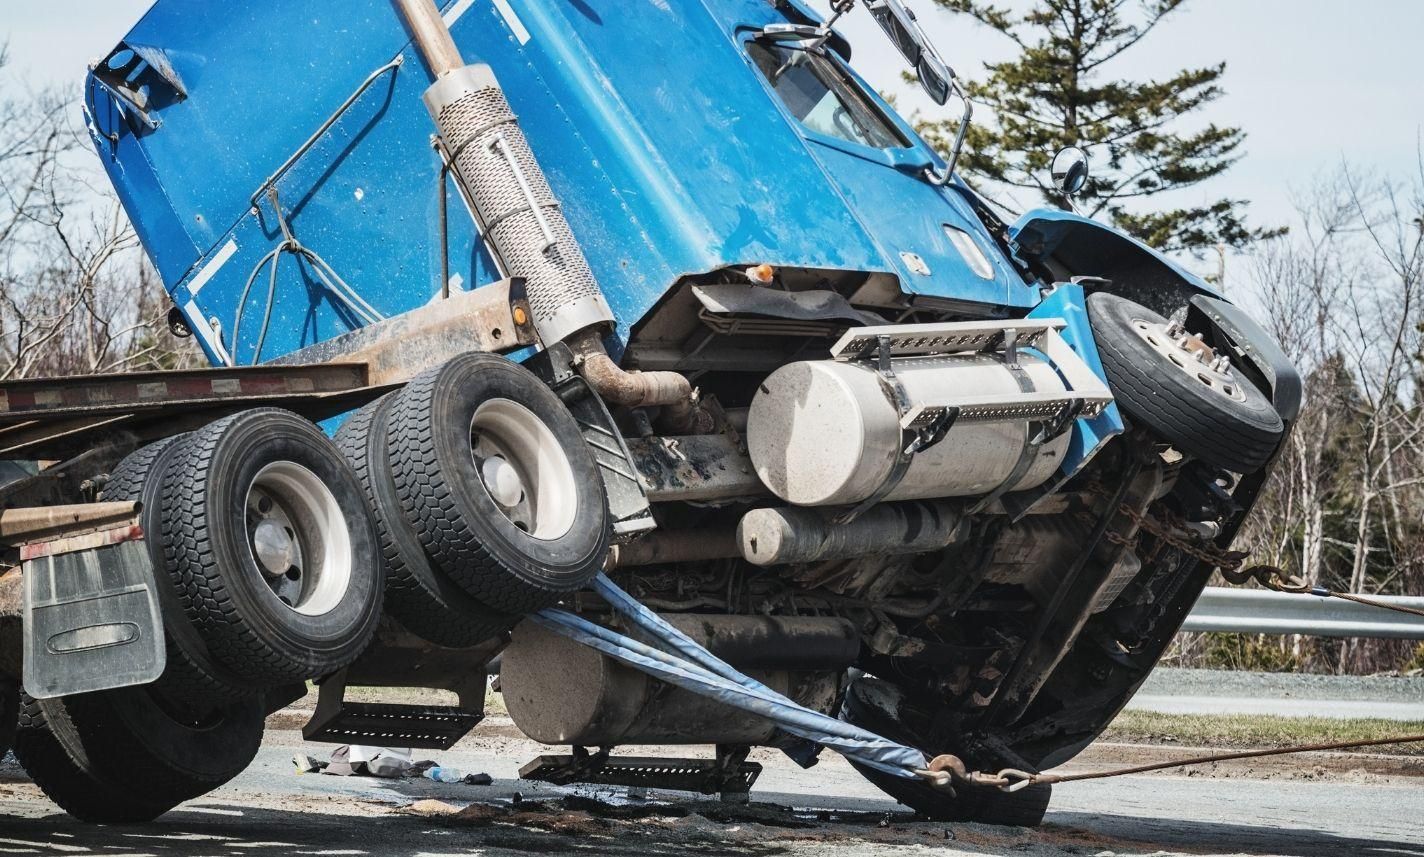 union-city-commercial-truck-accident-injury-lawyer